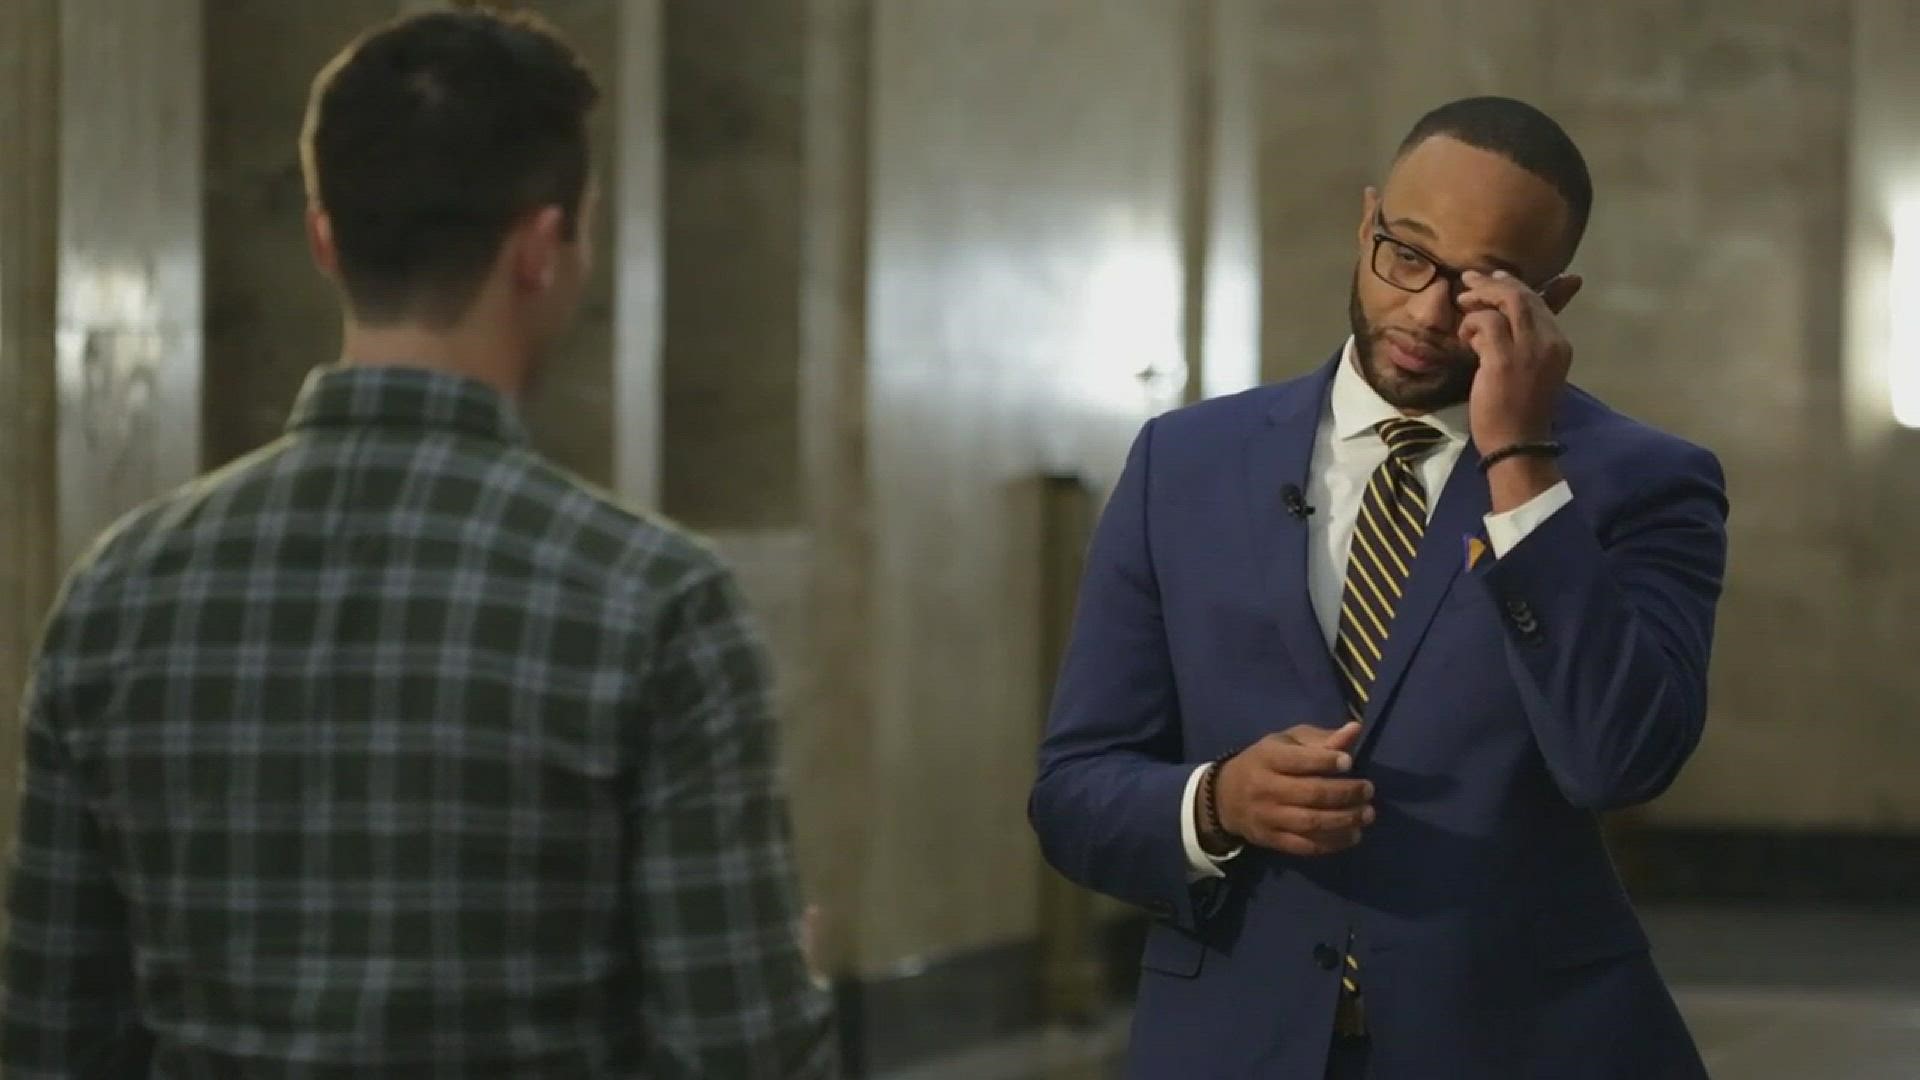 City Councilman Albus Brooks talks to 9NEWS after the proposal for safe injection sites in Denver passes City Council a second time.